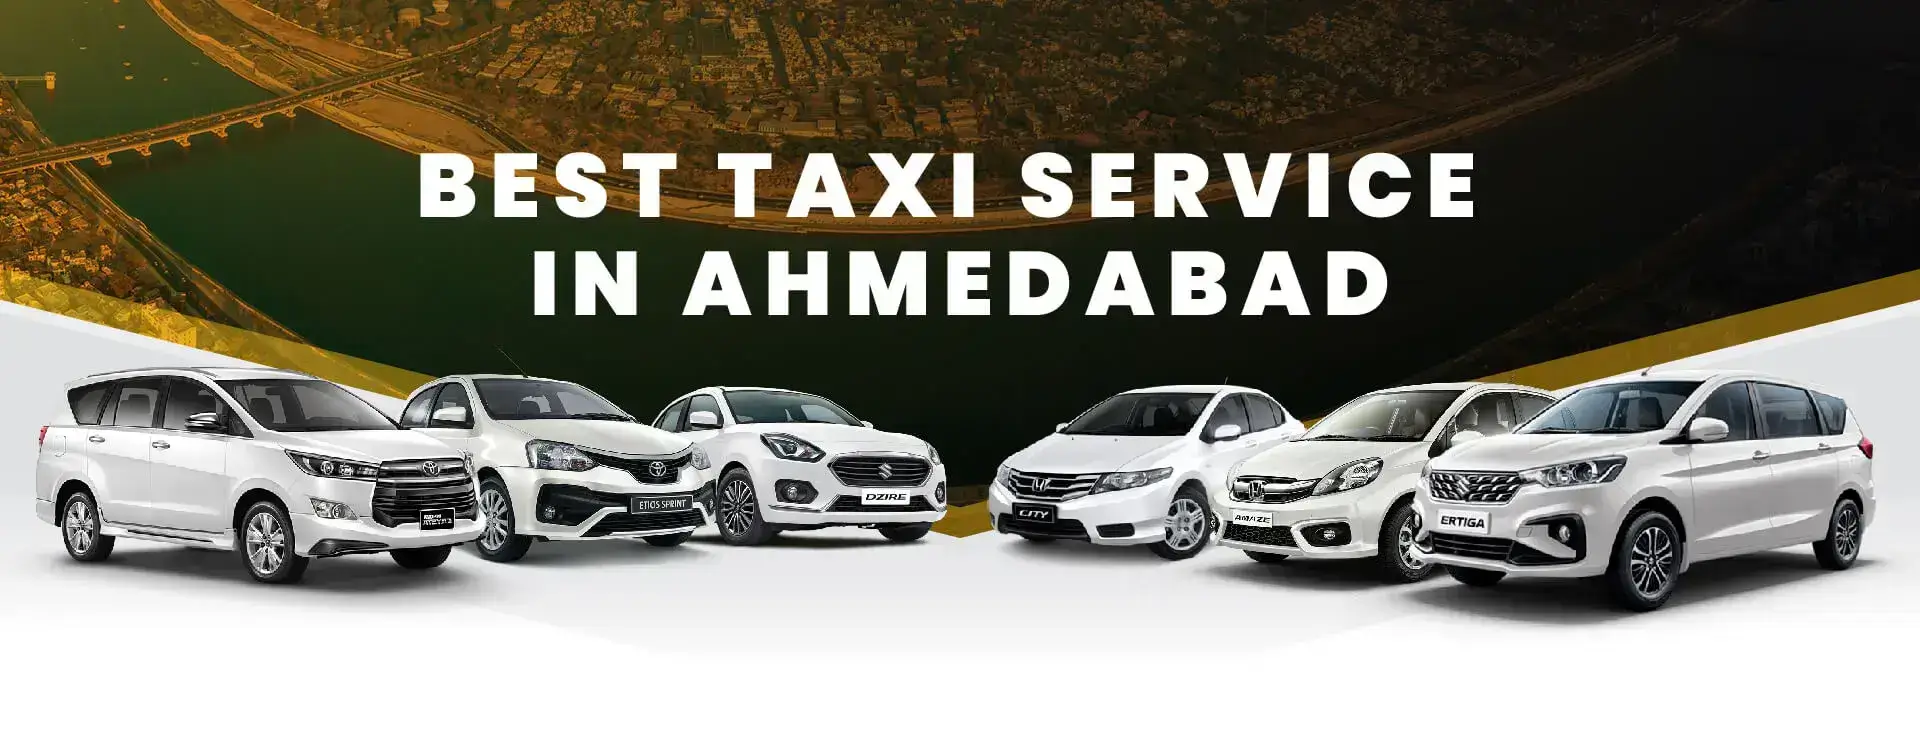 View homepage new banner showing our best taxi service in Ahmedabad